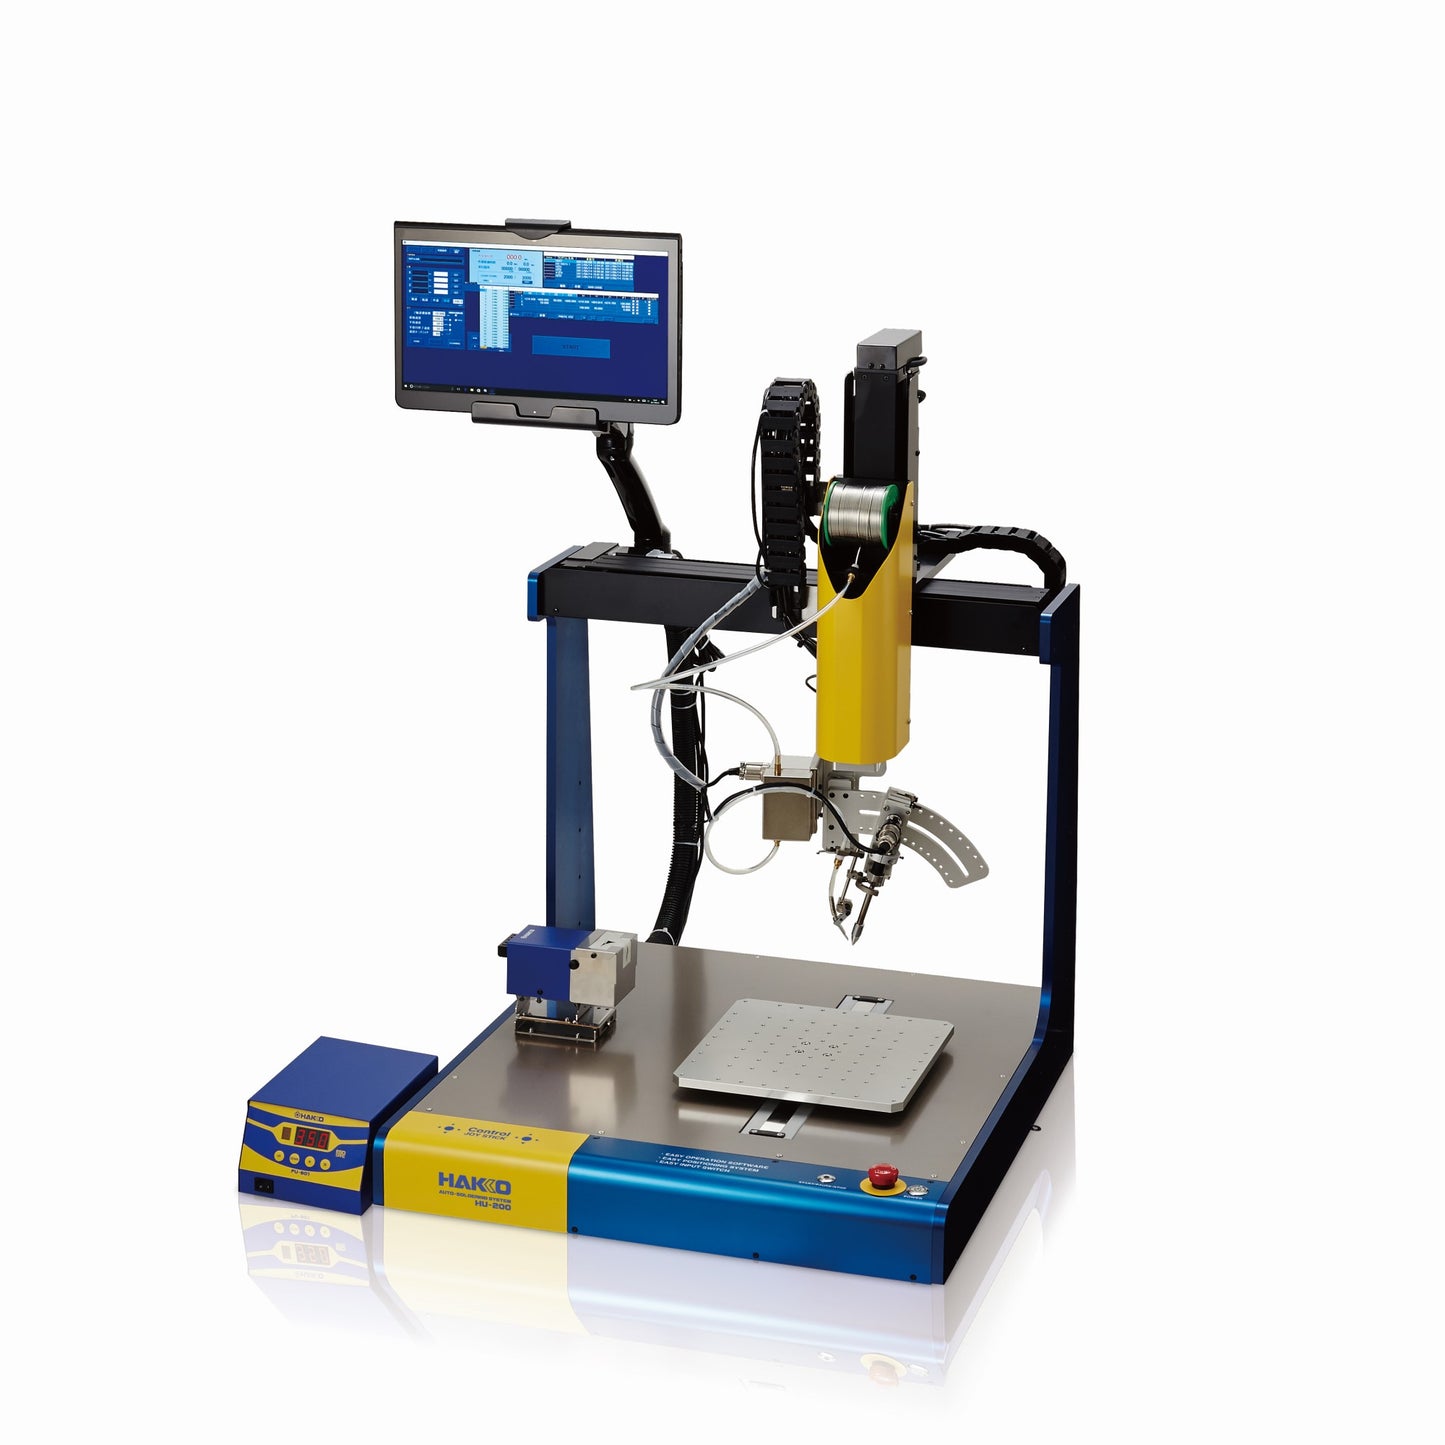 Hakko Products Pte Ltd_ HU-200 Auto Soldering System 4-axis soldering robot auto solder feeder self cleaning function easy programmable